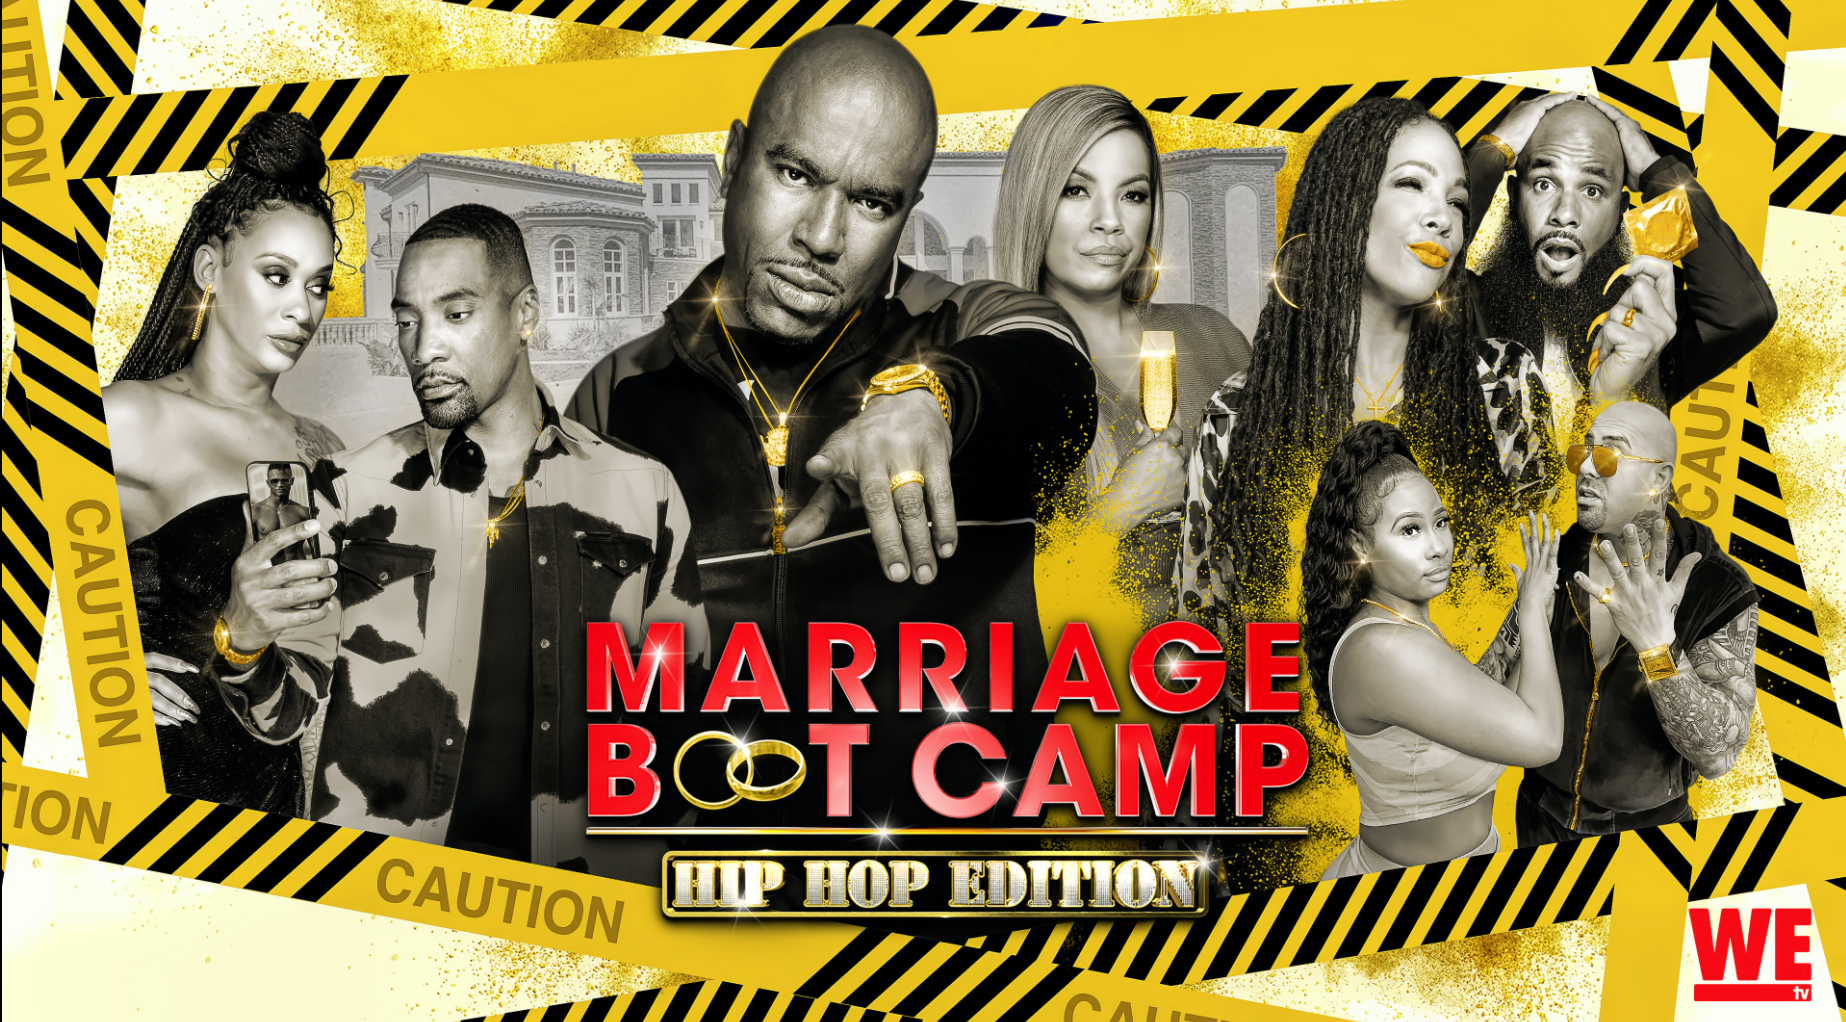 Marriage Boot Camp returns with Hip Hop Edition tonight How to watch and stream for free